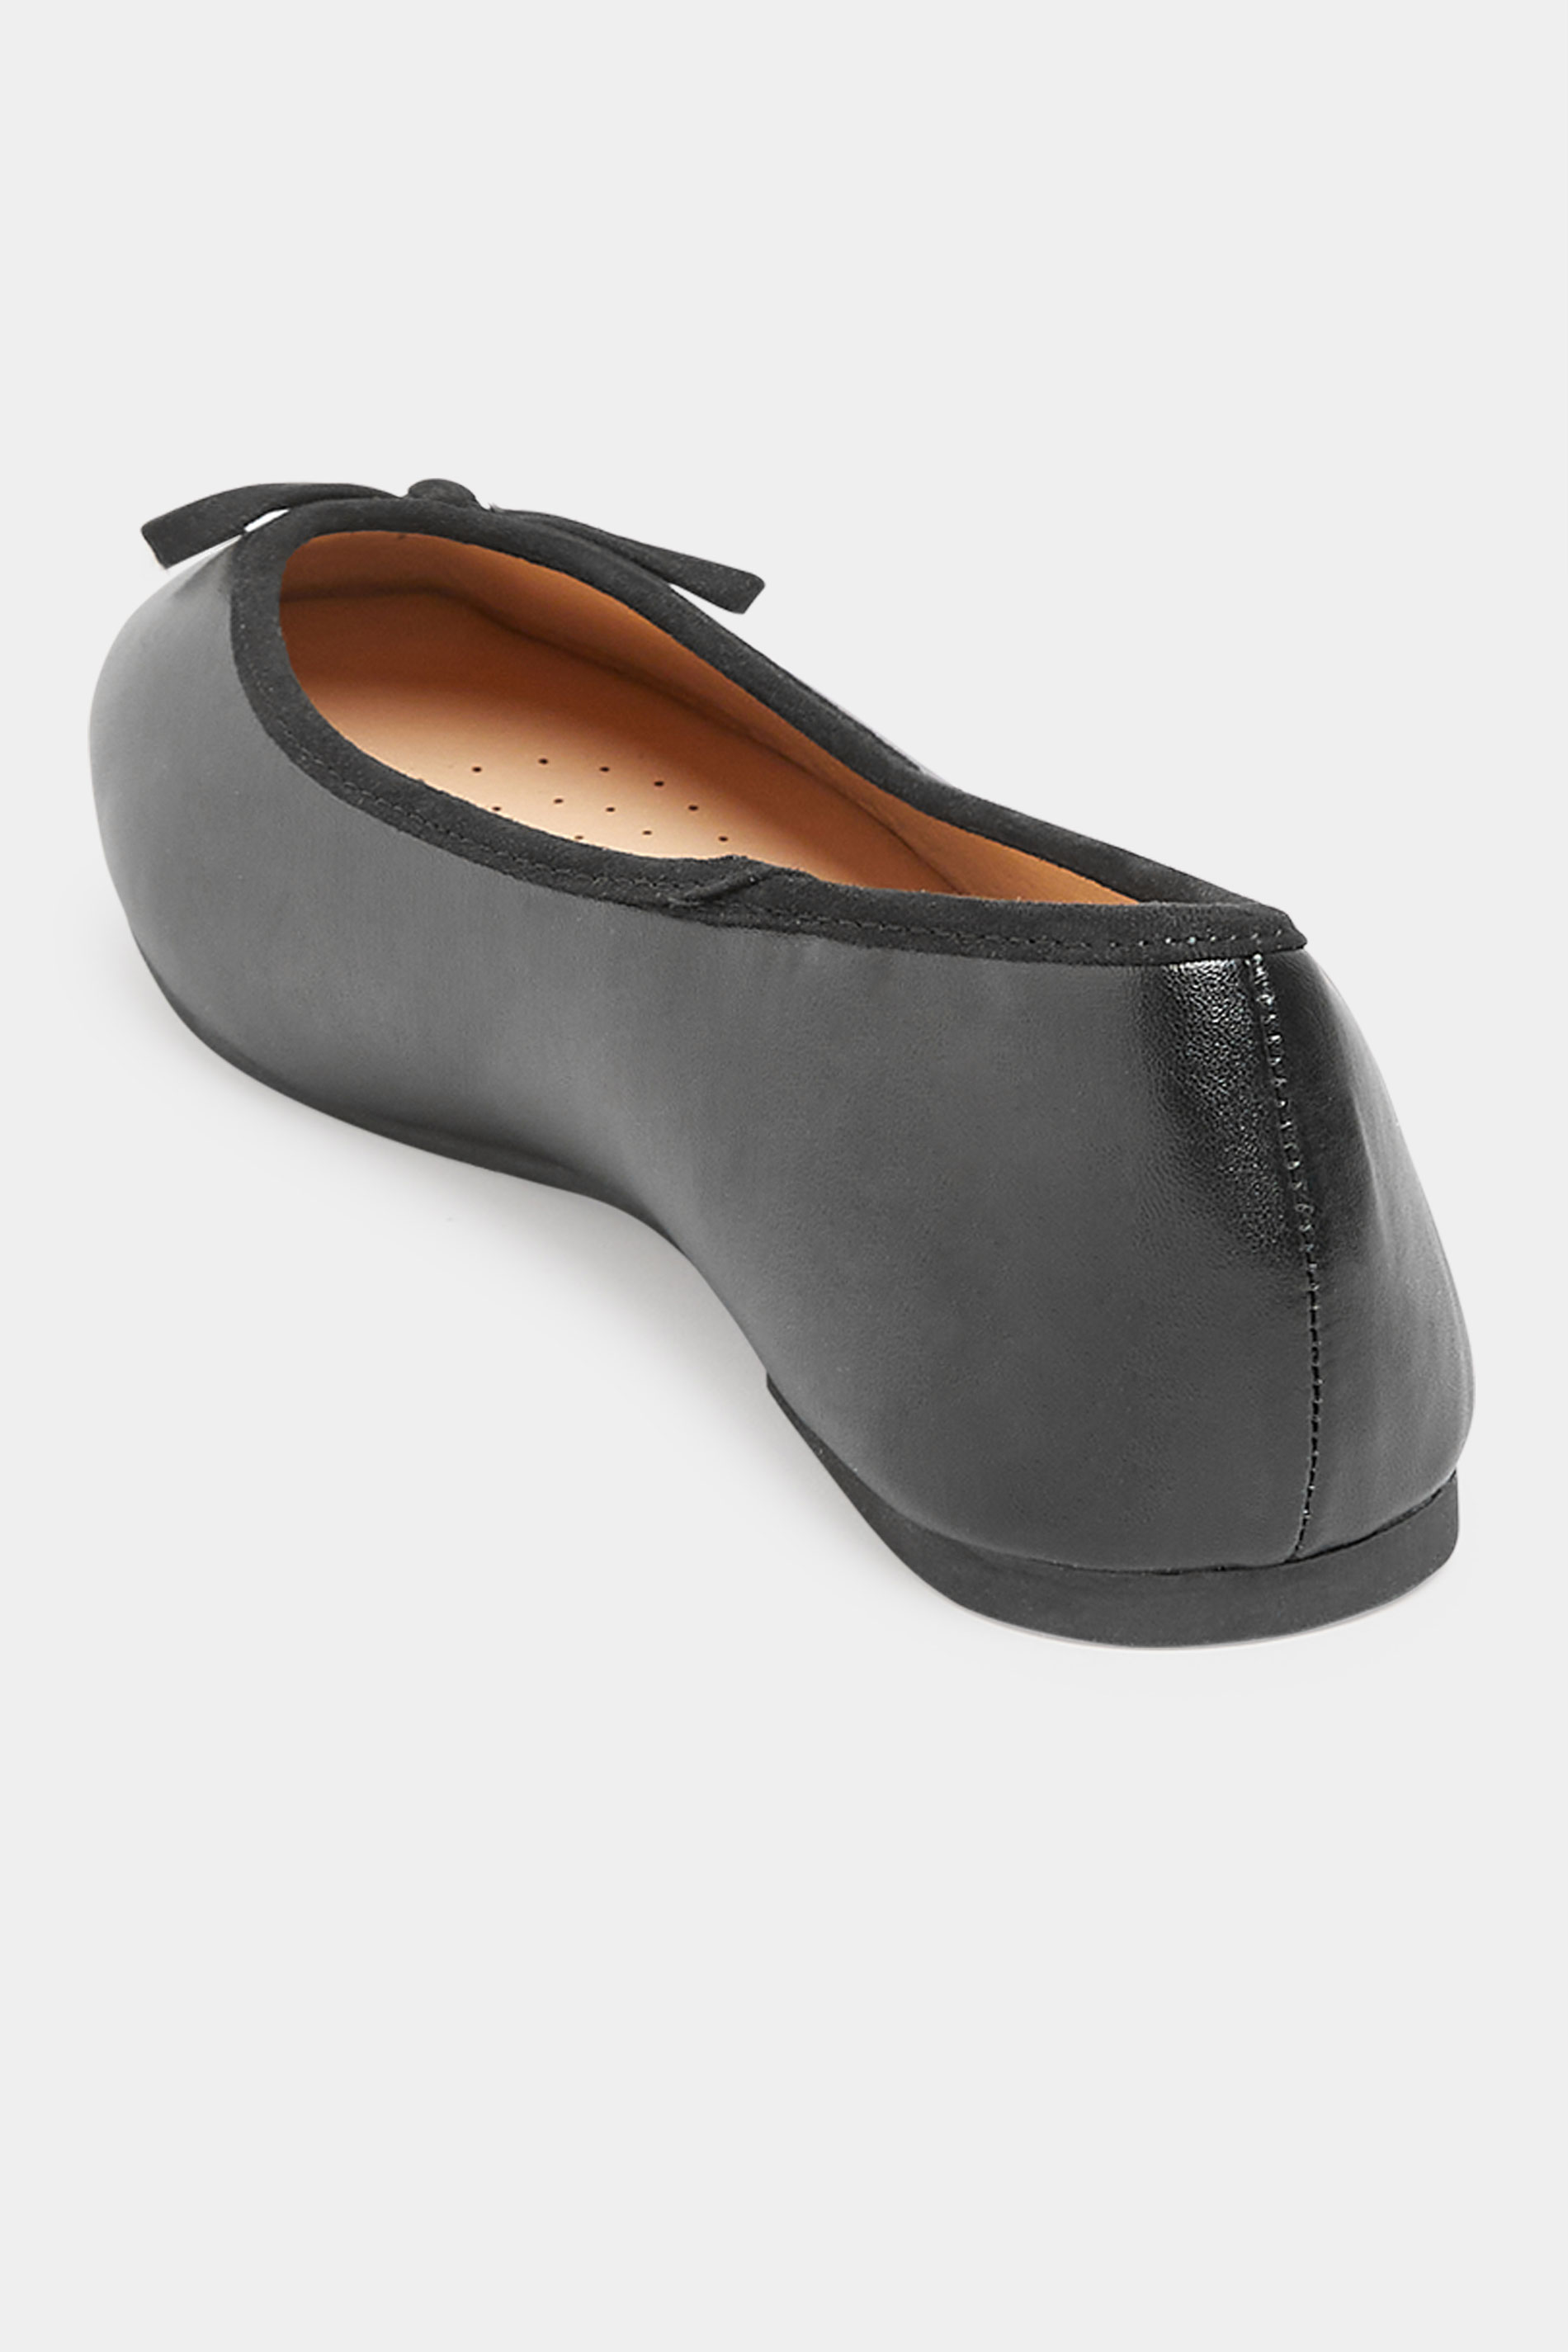 Roberto Festa Leather Flats in Black Womens Shoes Flats and flat shoes Ballet flats and ballerina shoes 